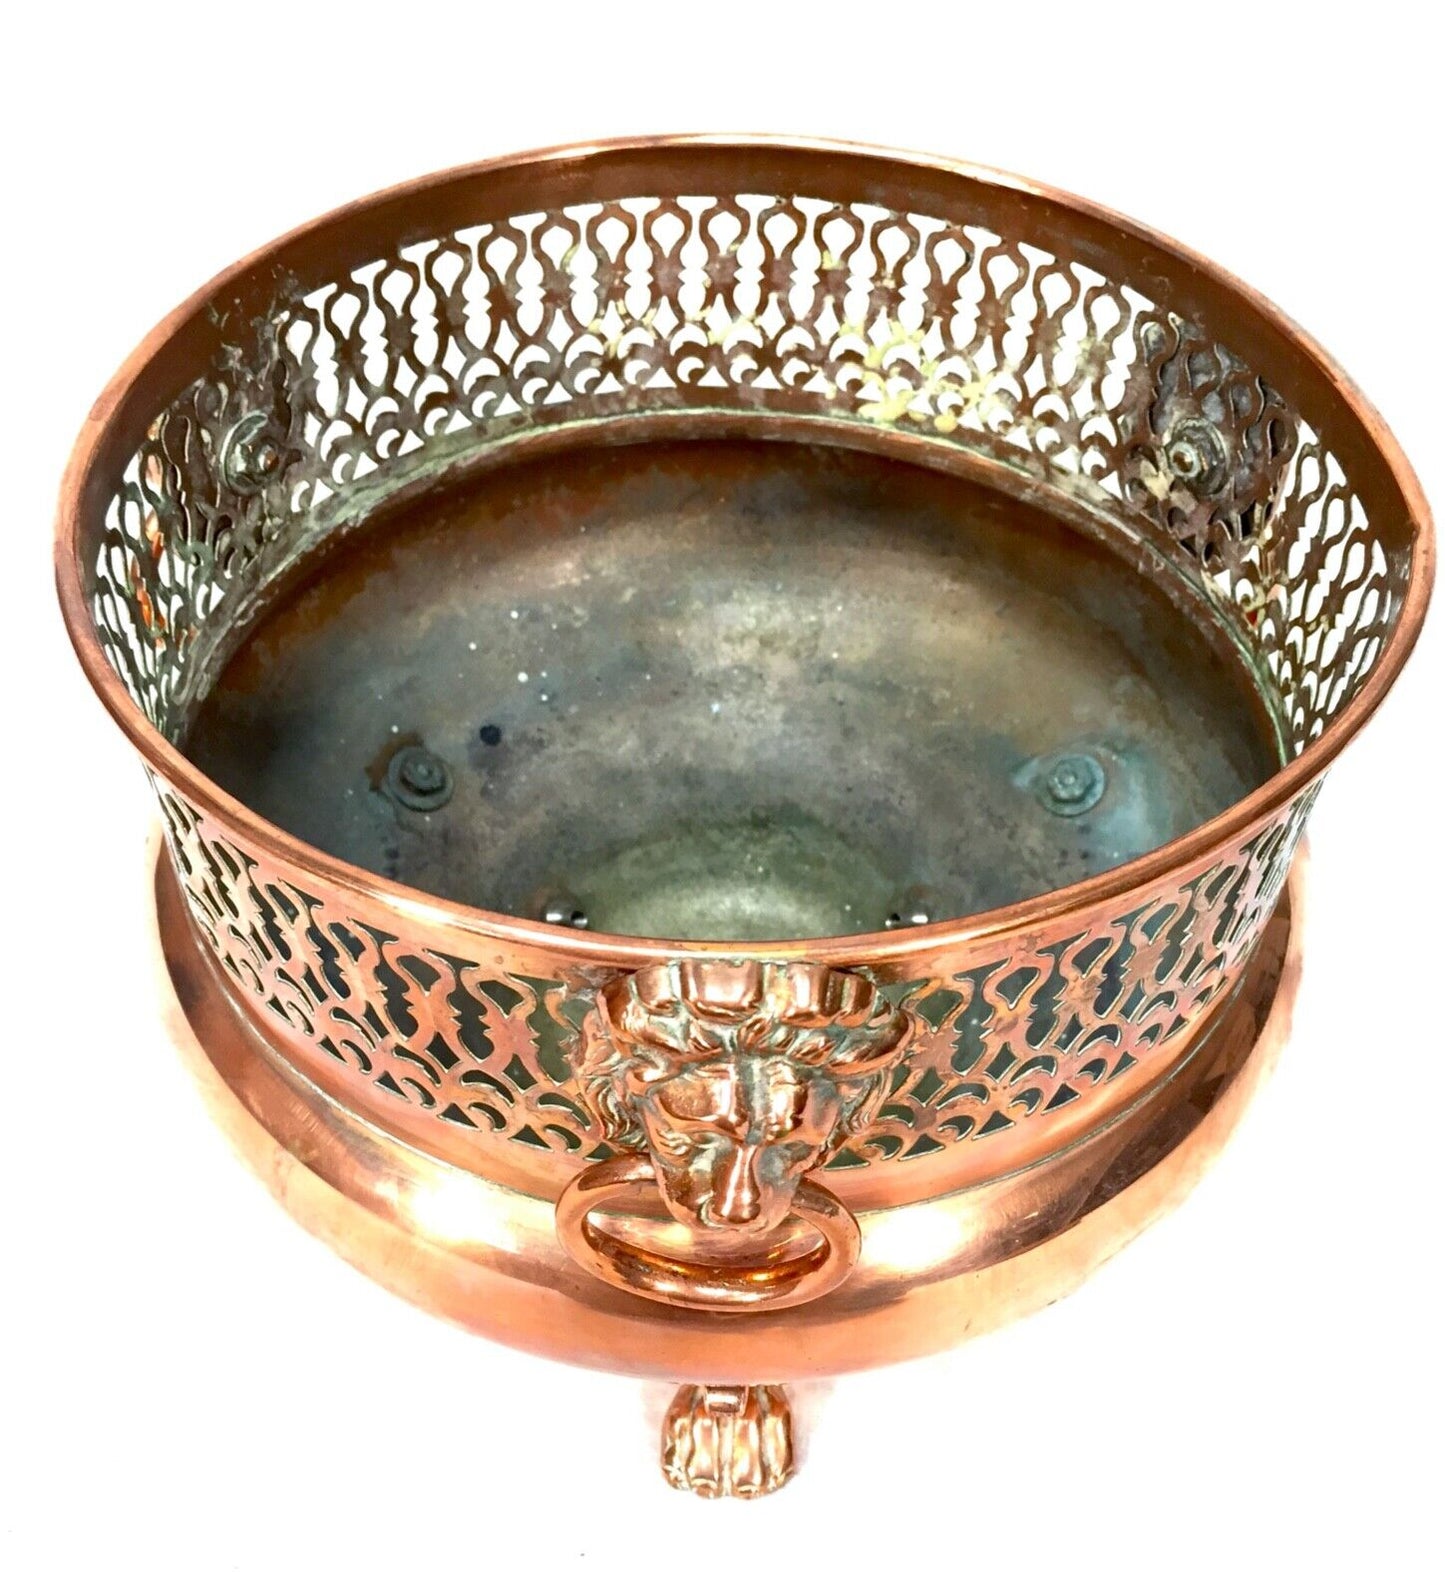 Antique Arts And Crafts Copper Planter by William Soutter & Sons / c.1890